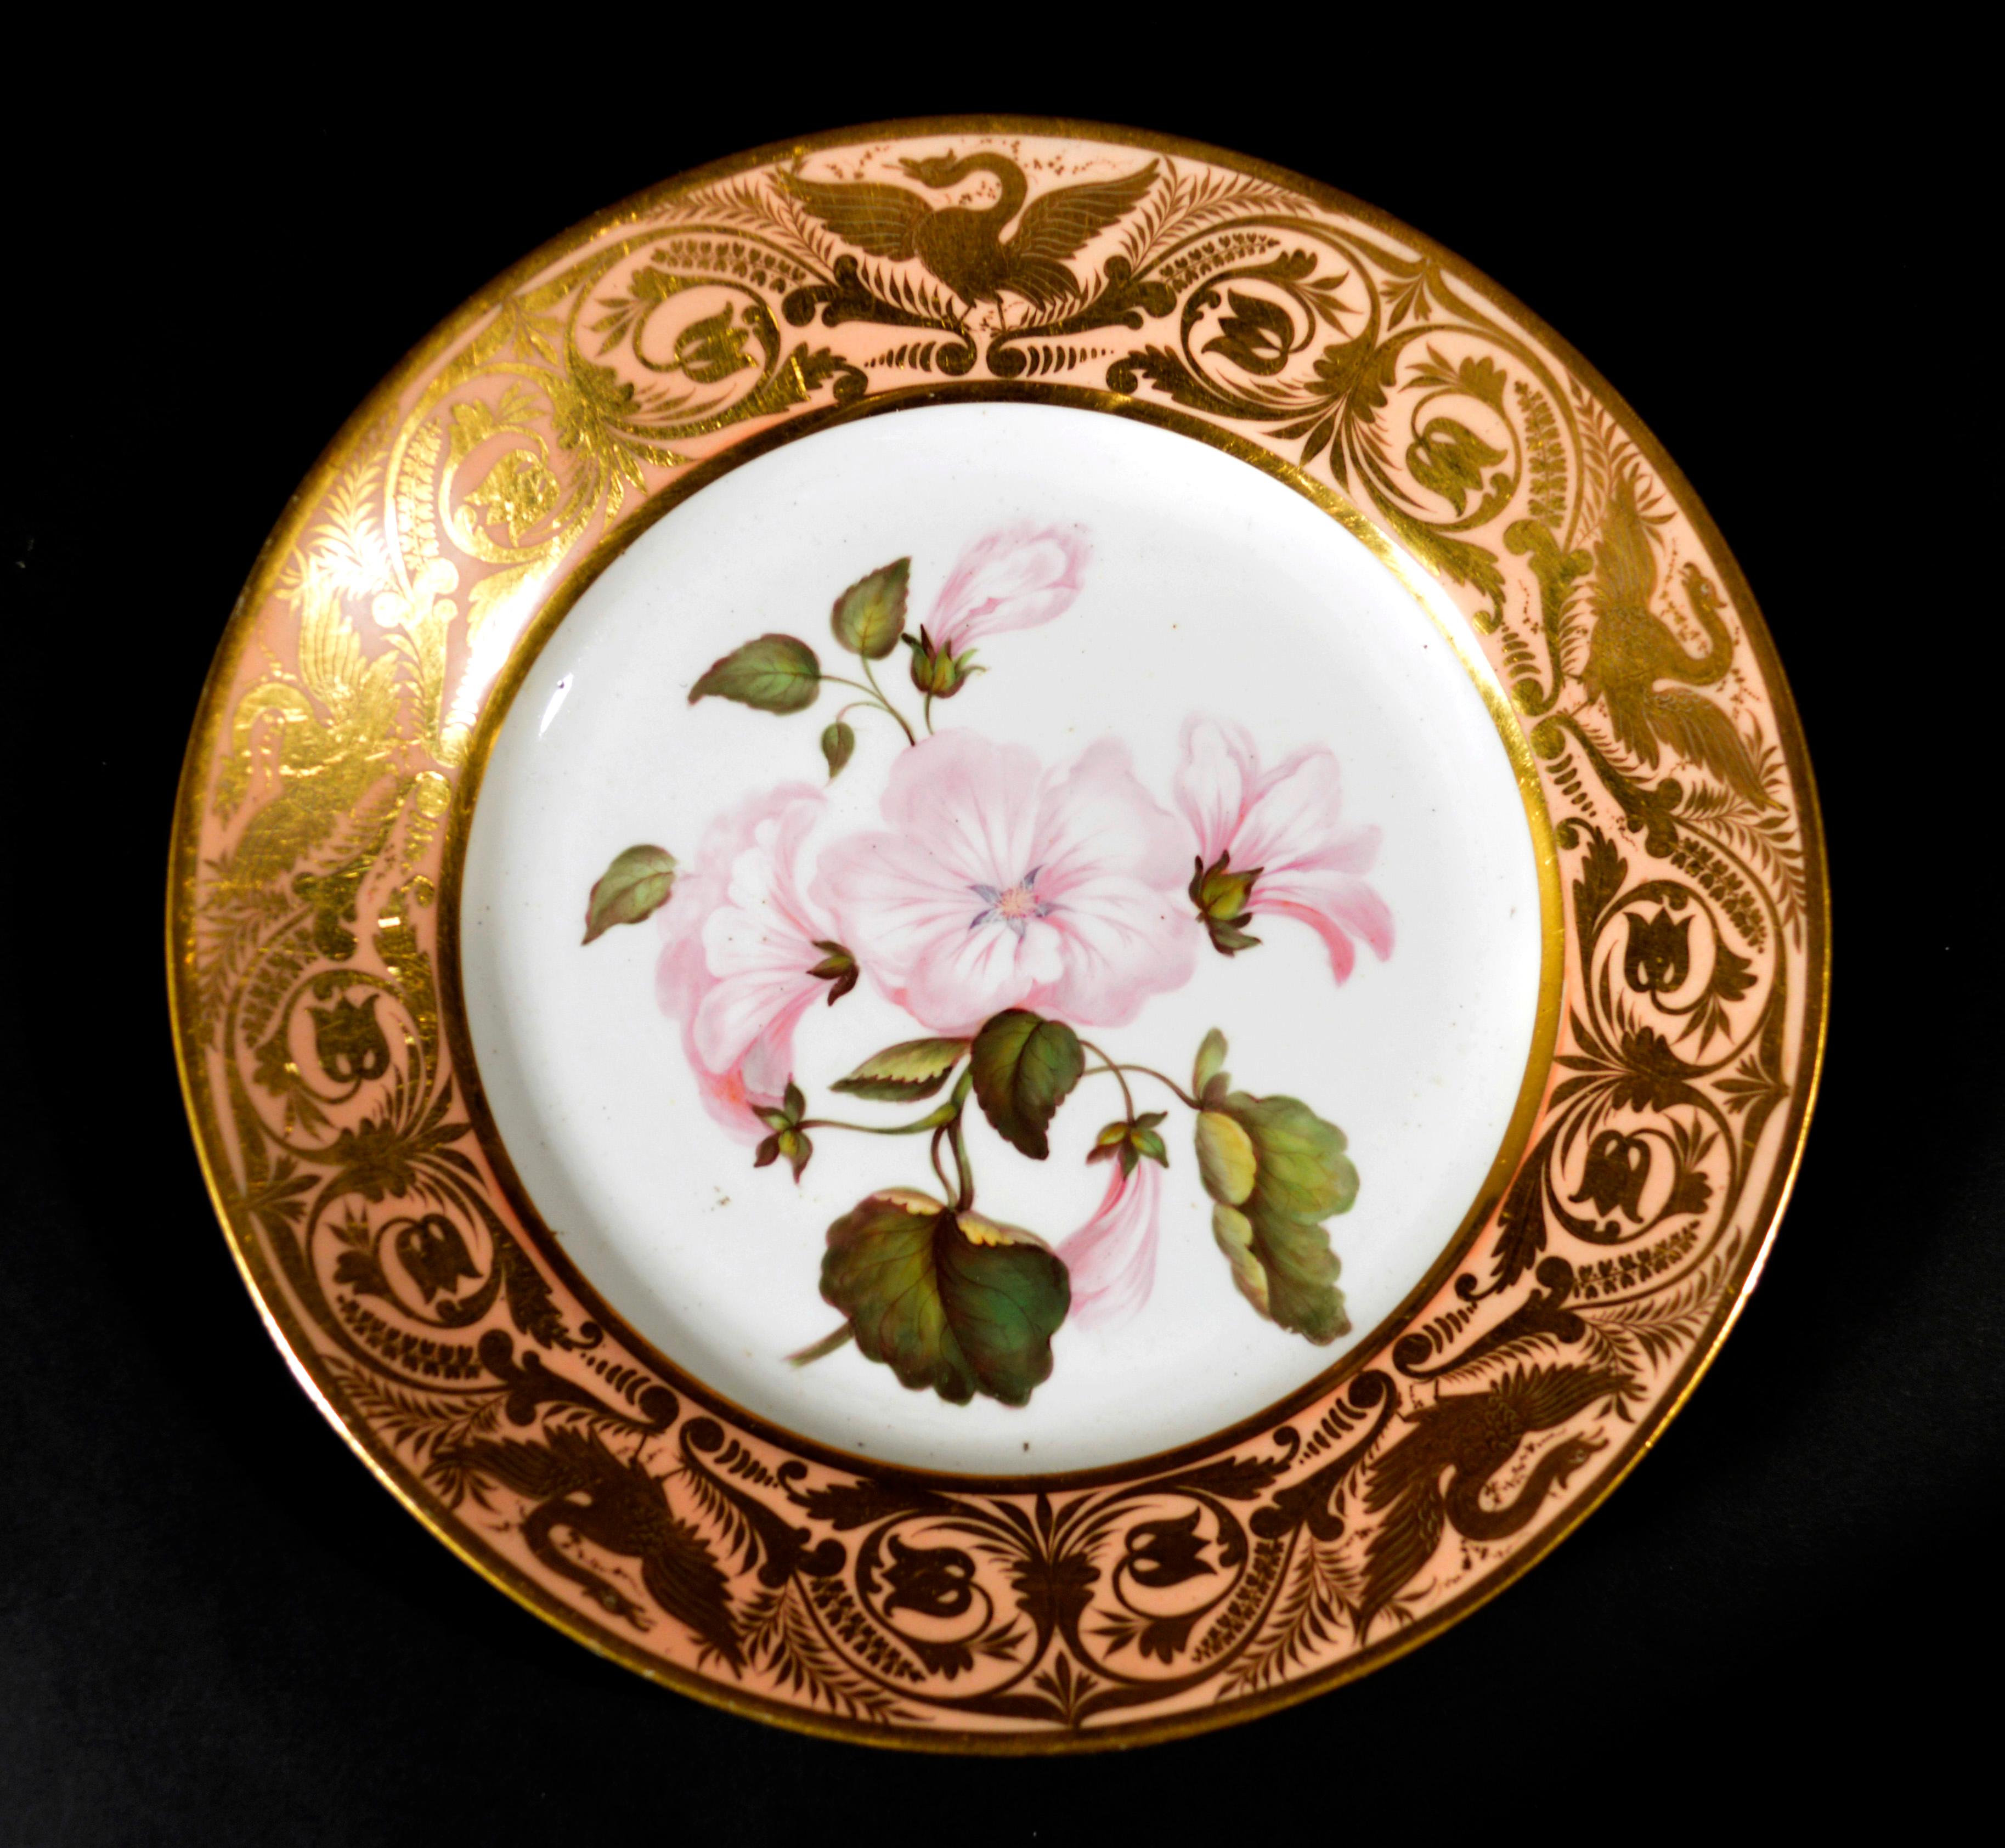 Antique Derby Porcelain Botanical Salmon-ground Plate,
Annual Lavetera,
by John Brewer,
Circa 1815.

The Derby porcelain plate is boldly painted with an Annual Lavetera botanical specimen with richly gilded borders with swans and stylized